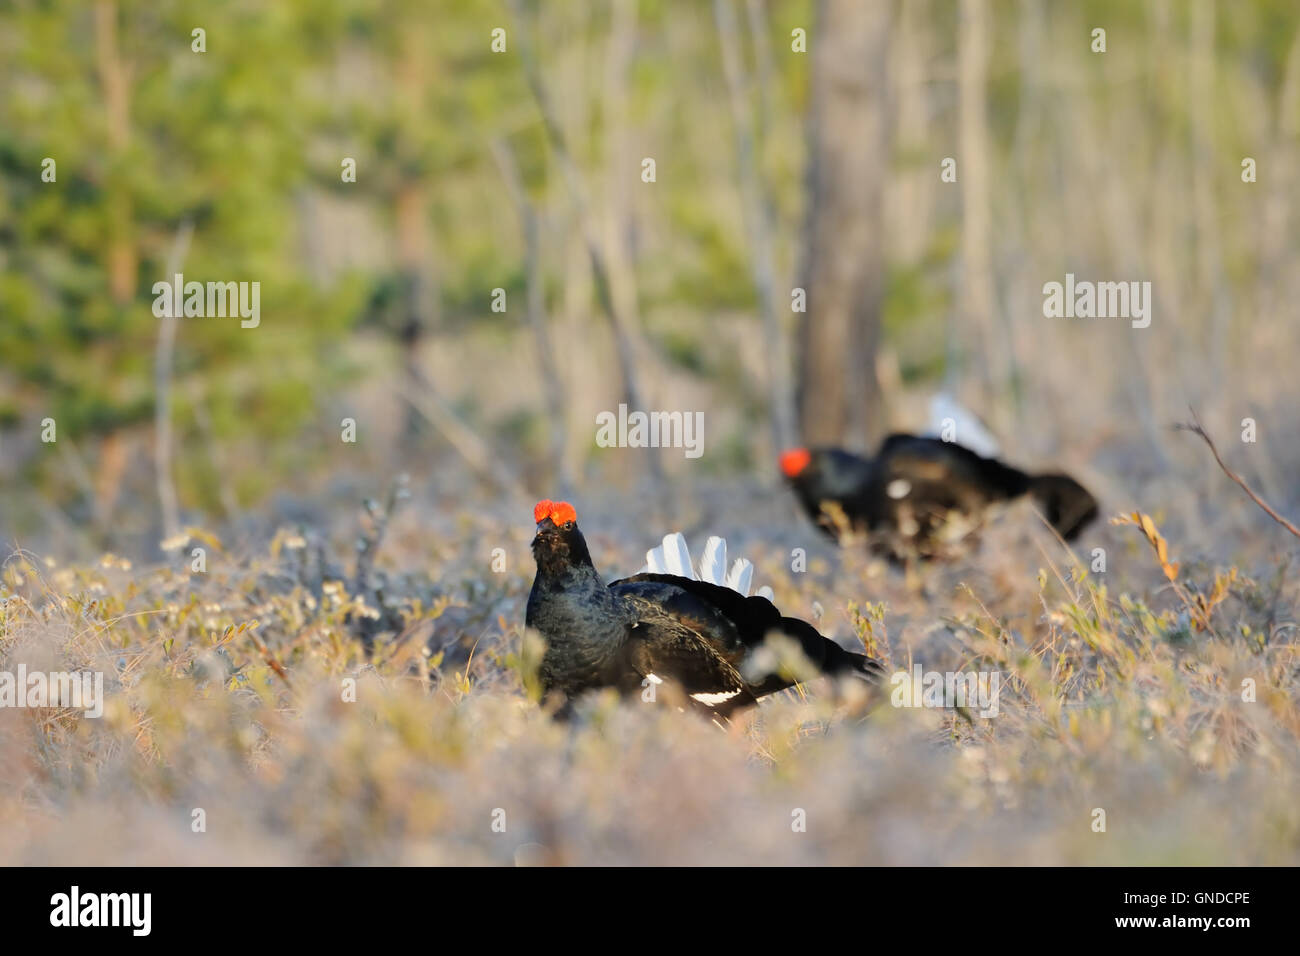 Male Black Grouses (Tetrao tetrix) at swamp courting place early in the morning. Stock Photo